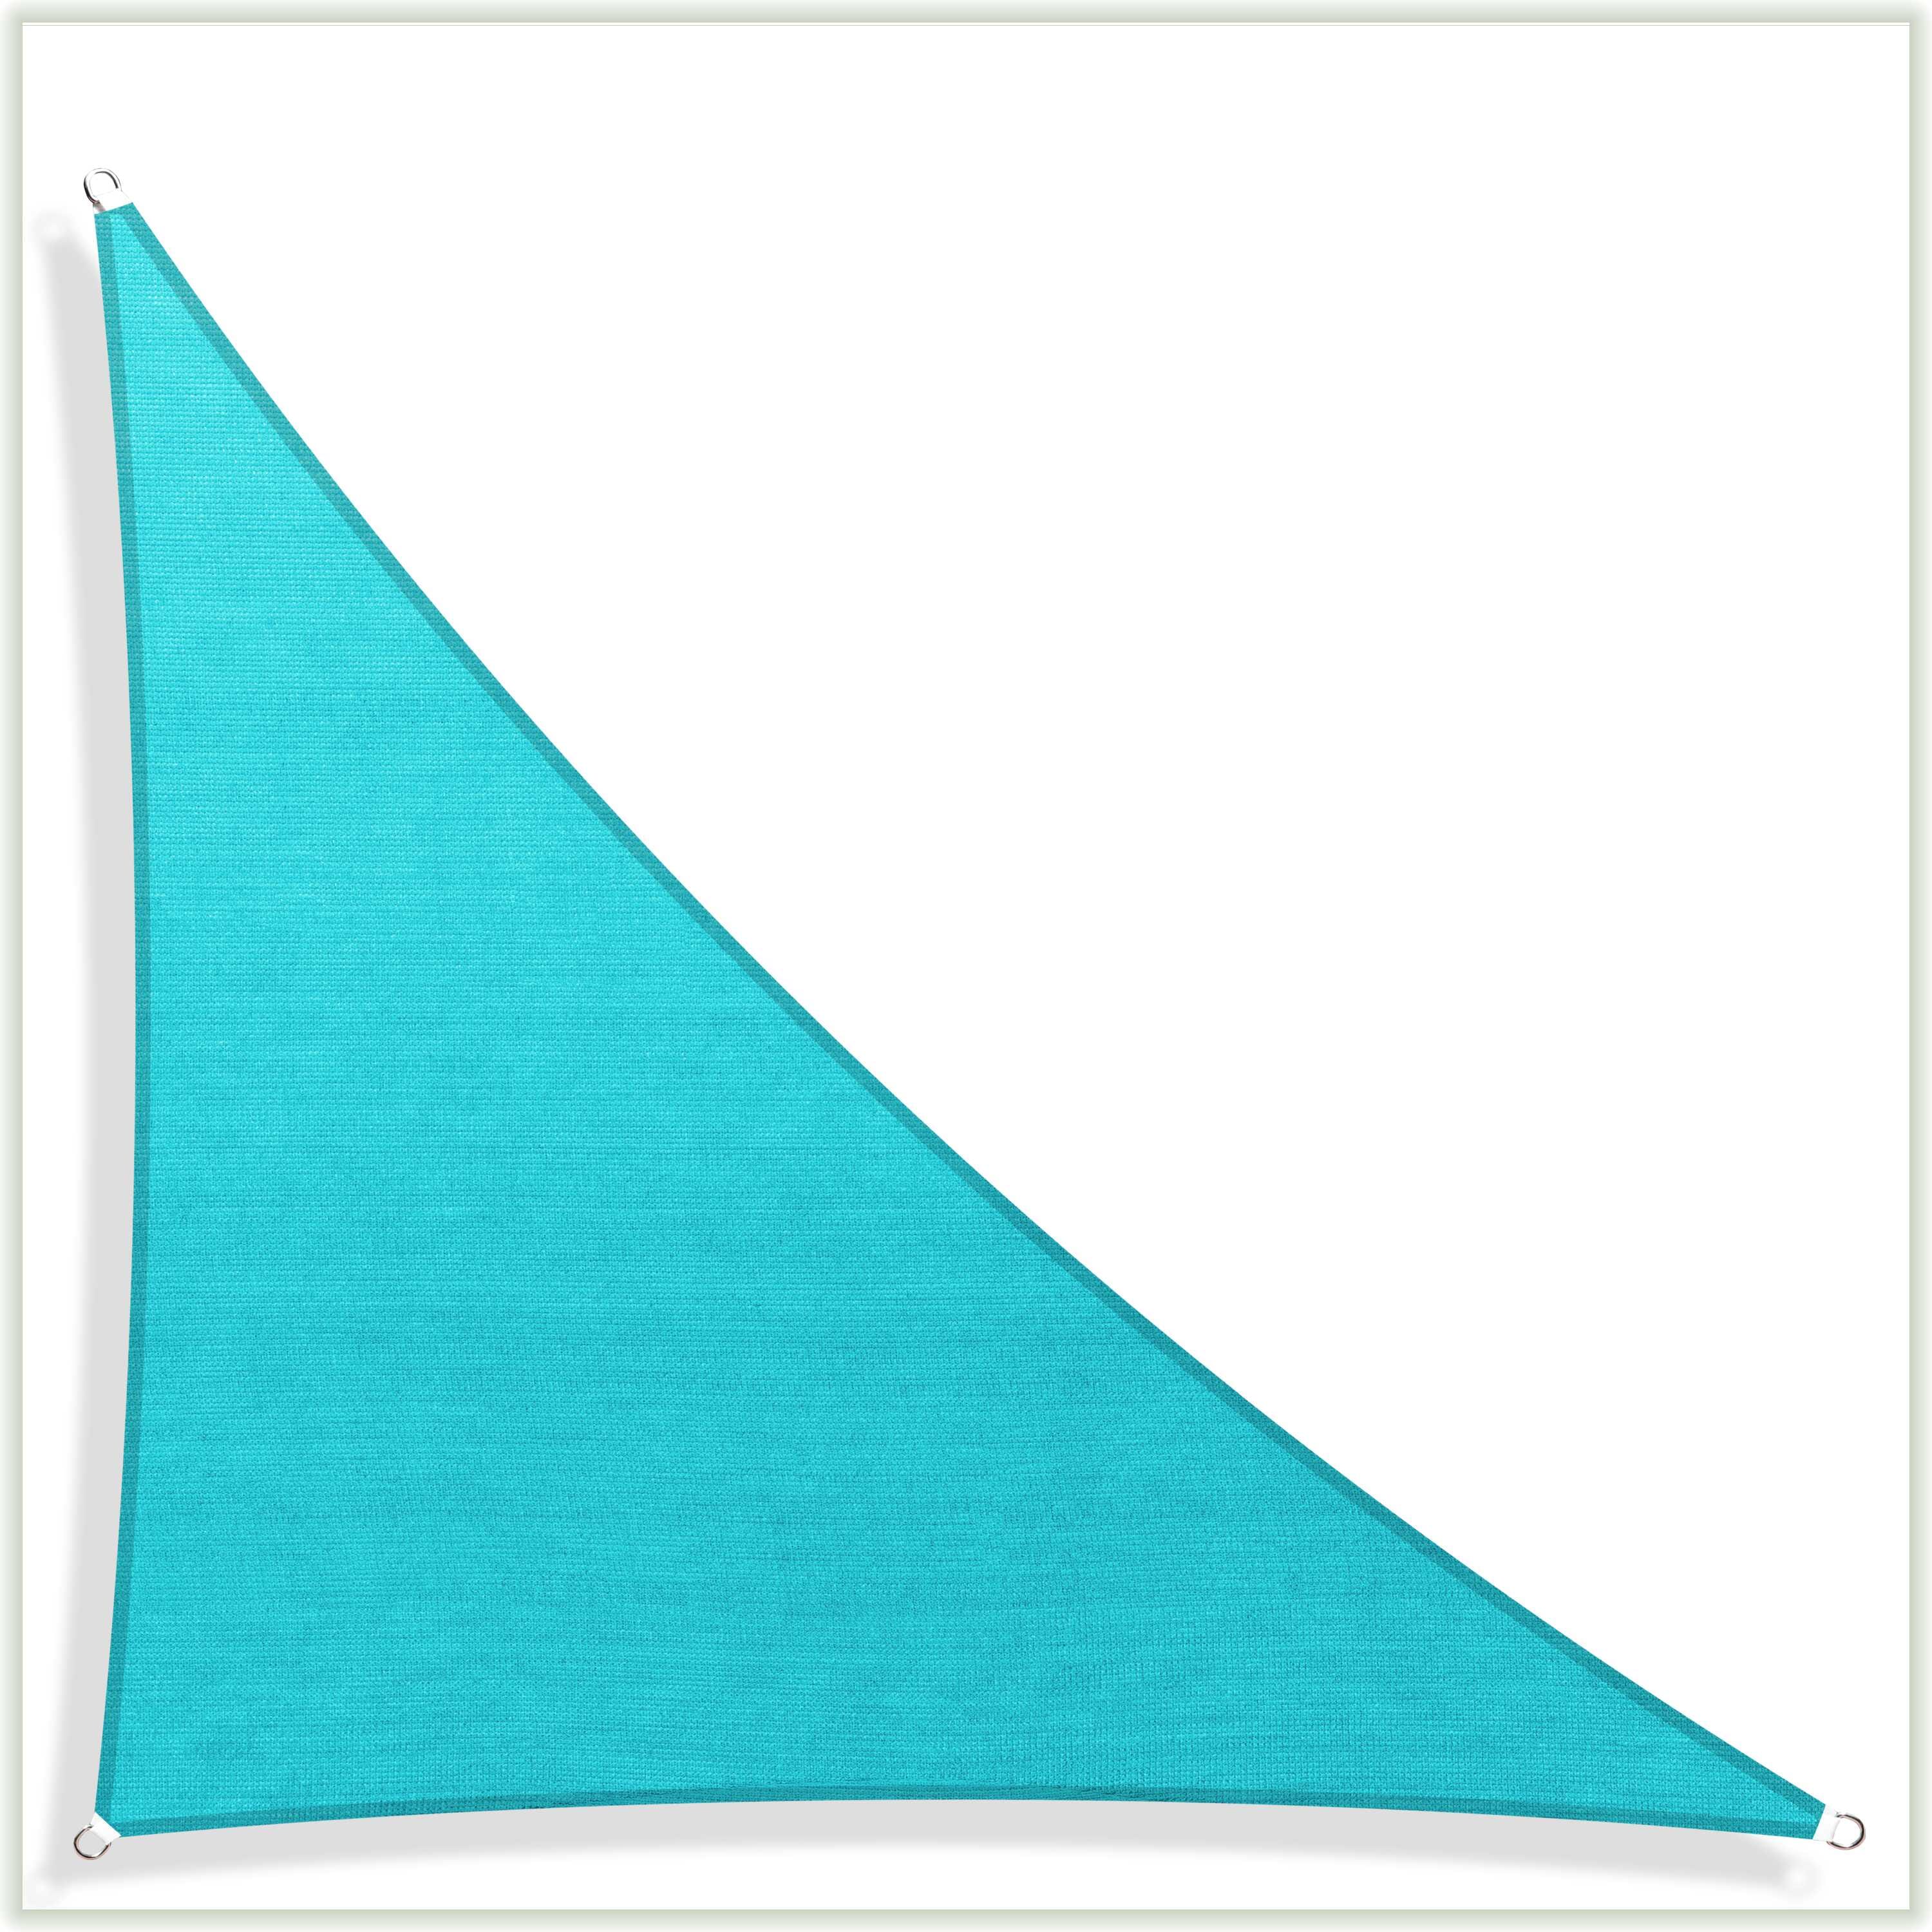 Right Triangle Sun Shade Sail Canopy, Commercial Grade, 7 Sizes, 8 Colors Sun Shade Sail Colourtree 24' x 24' x 33.9' Turquoise 